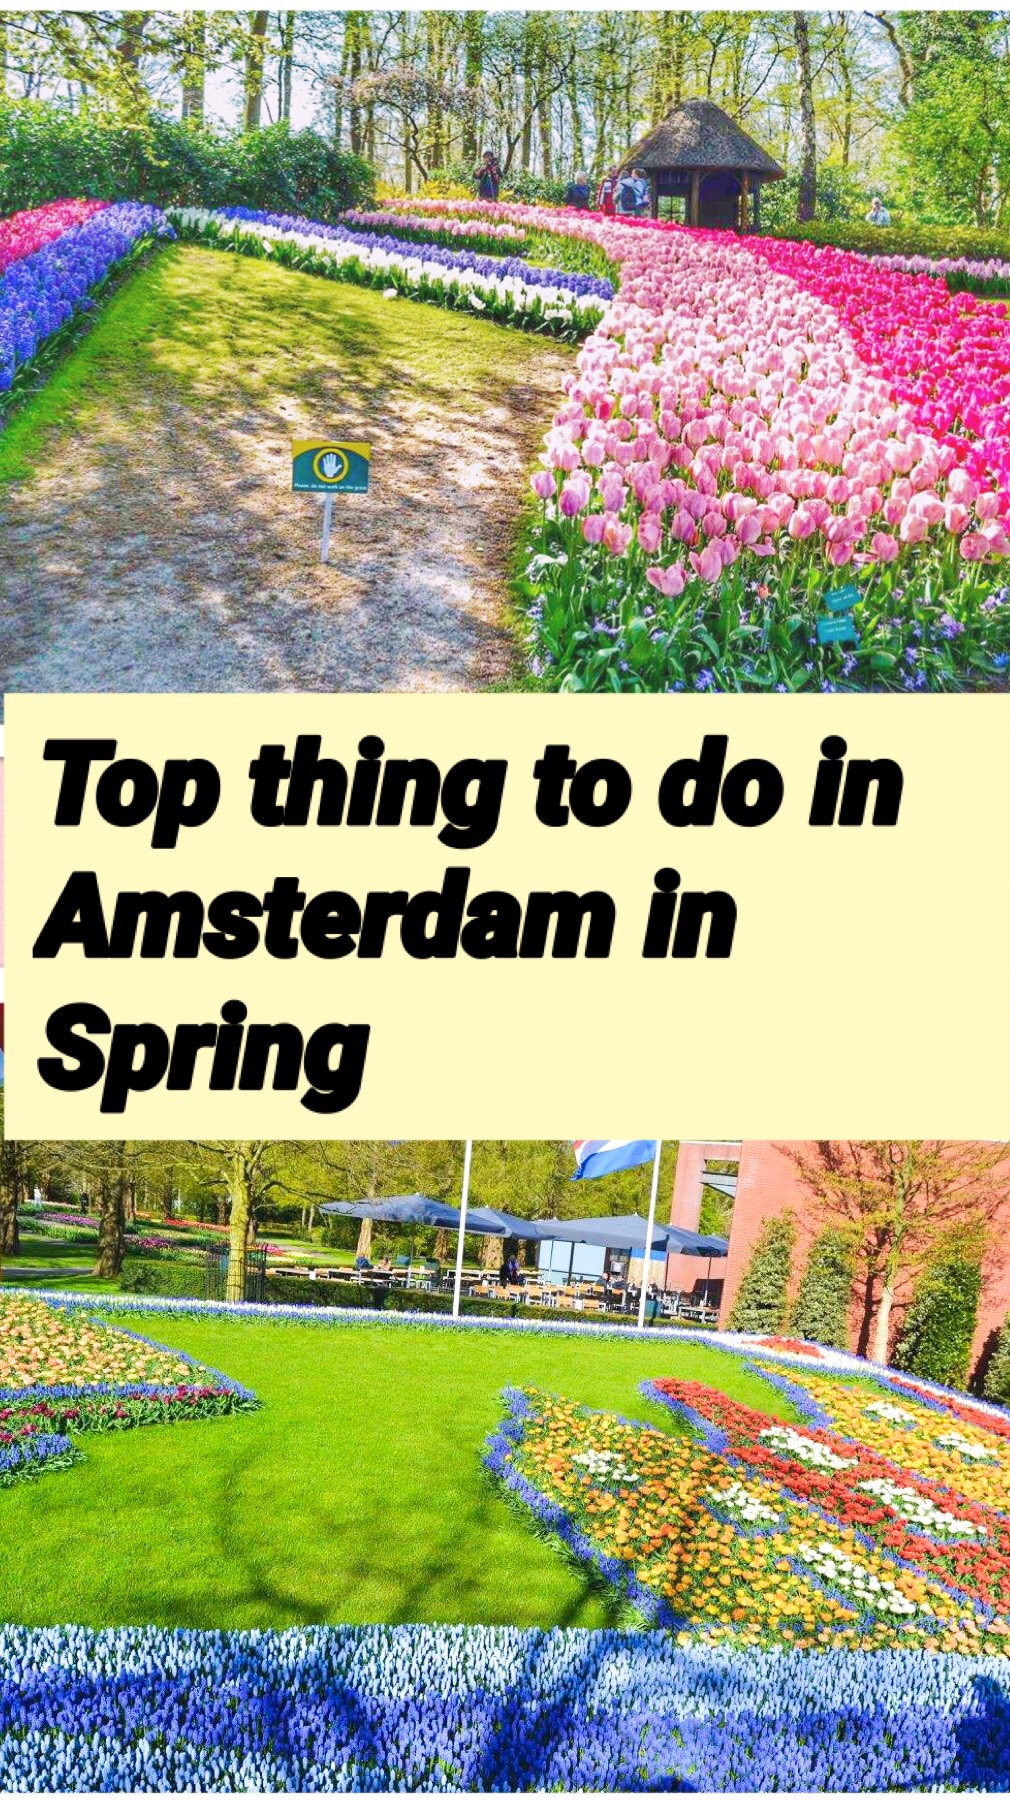 Top thing to do in Amsterdam in Spring